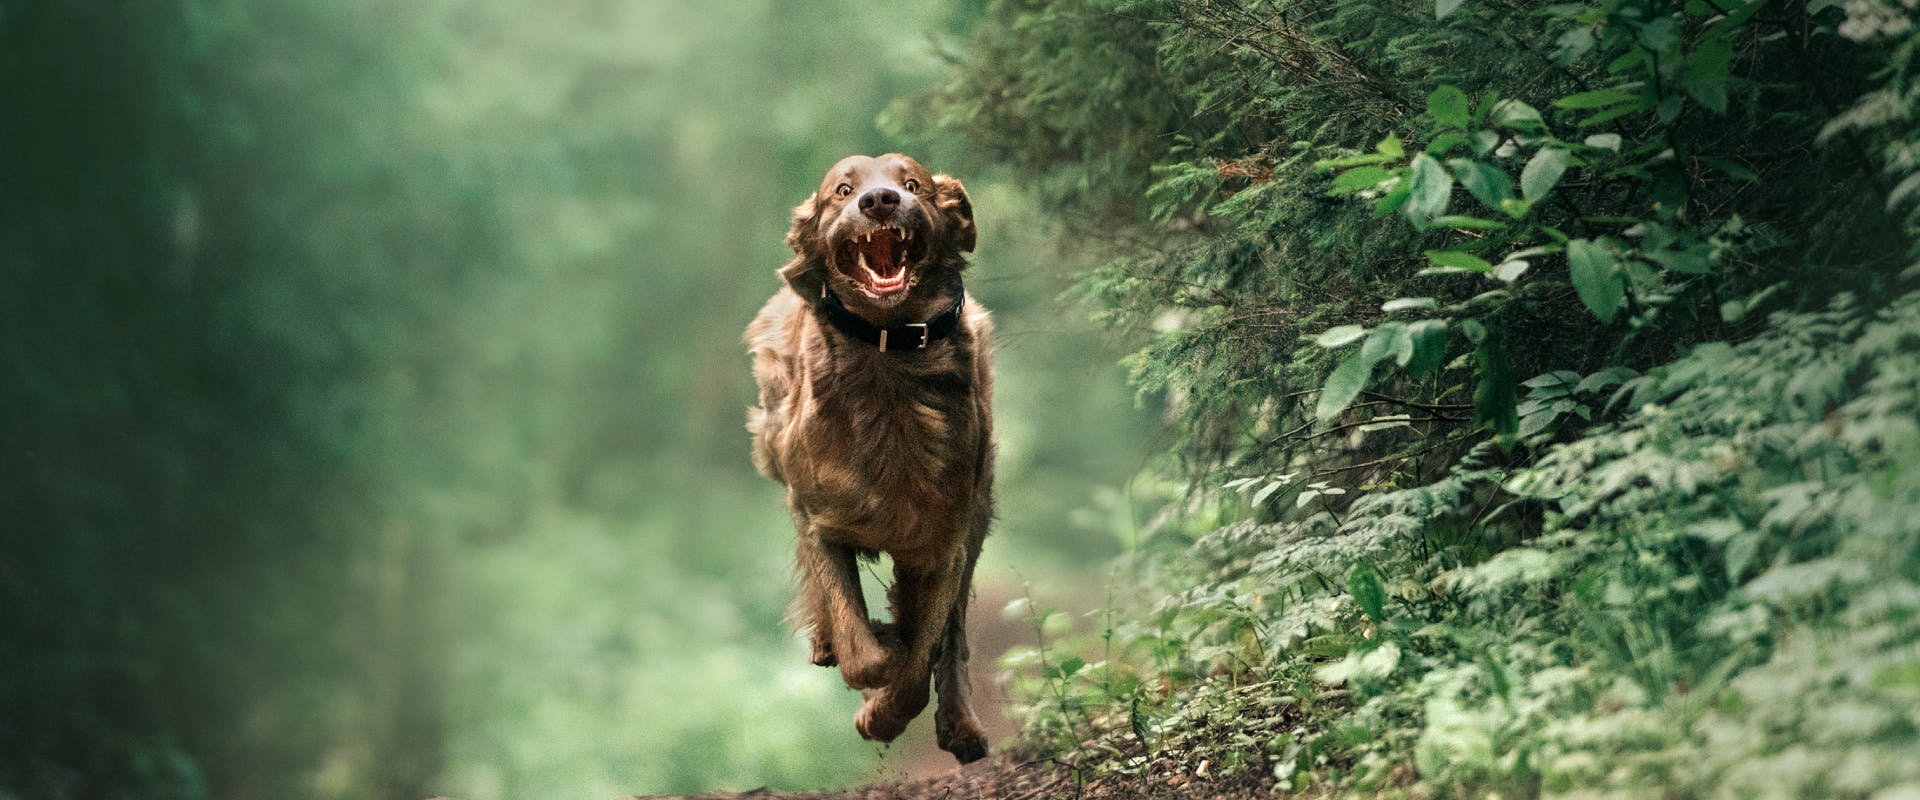 a large fluffy brown dog running along a woodland path surrounded by green leaves and bushes